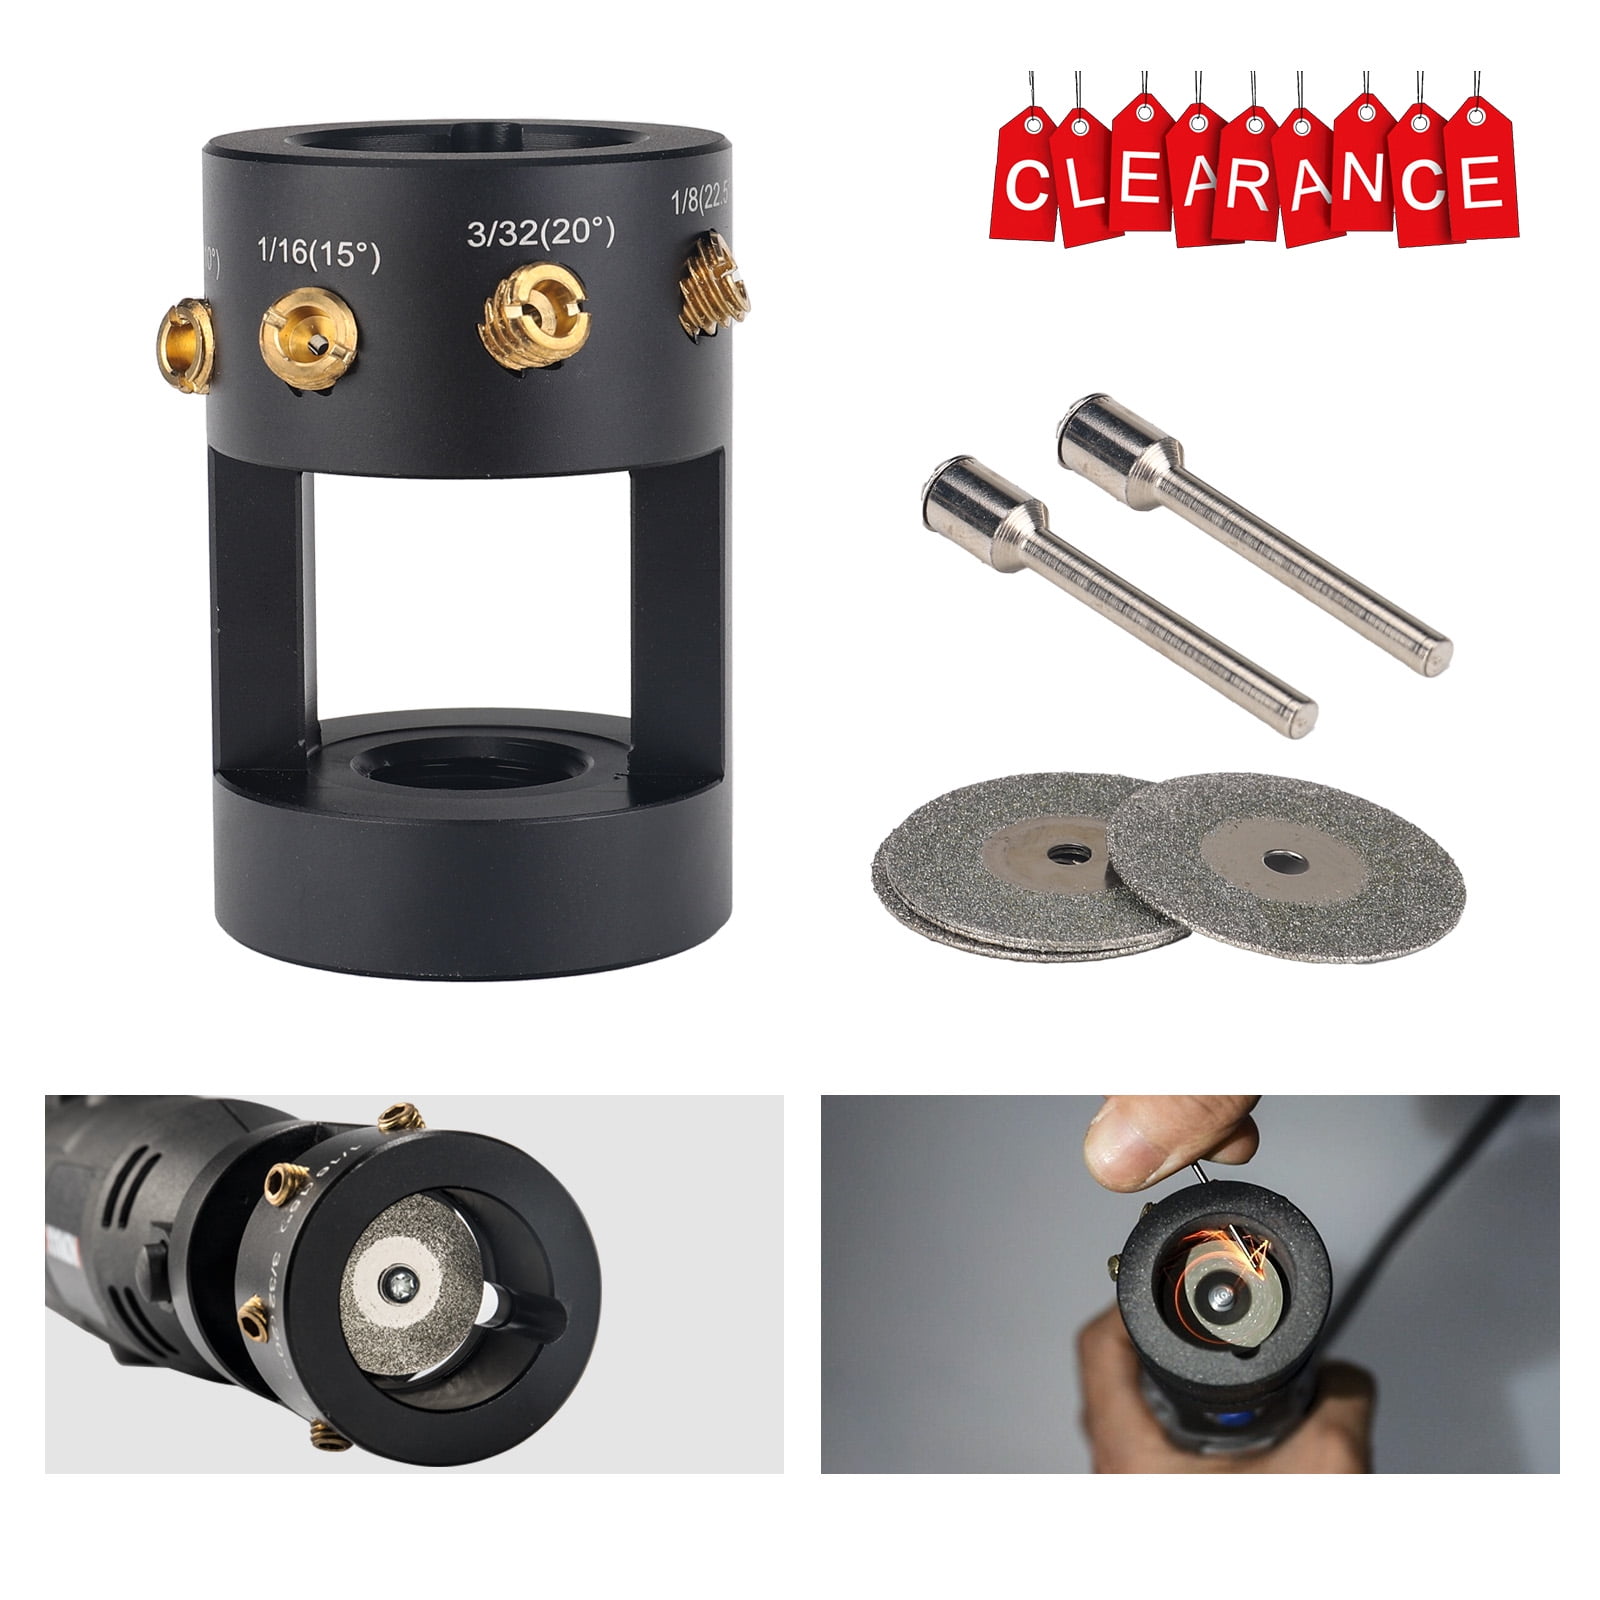 3mirrors ALUMINUM Tungsten Electrode Sharpener Grinder Head TIG Welding  Tool with Cut-Off Slot Multi-Angle & Offsets, 4 Copper Screw Holes -  Exchangeable Guides 